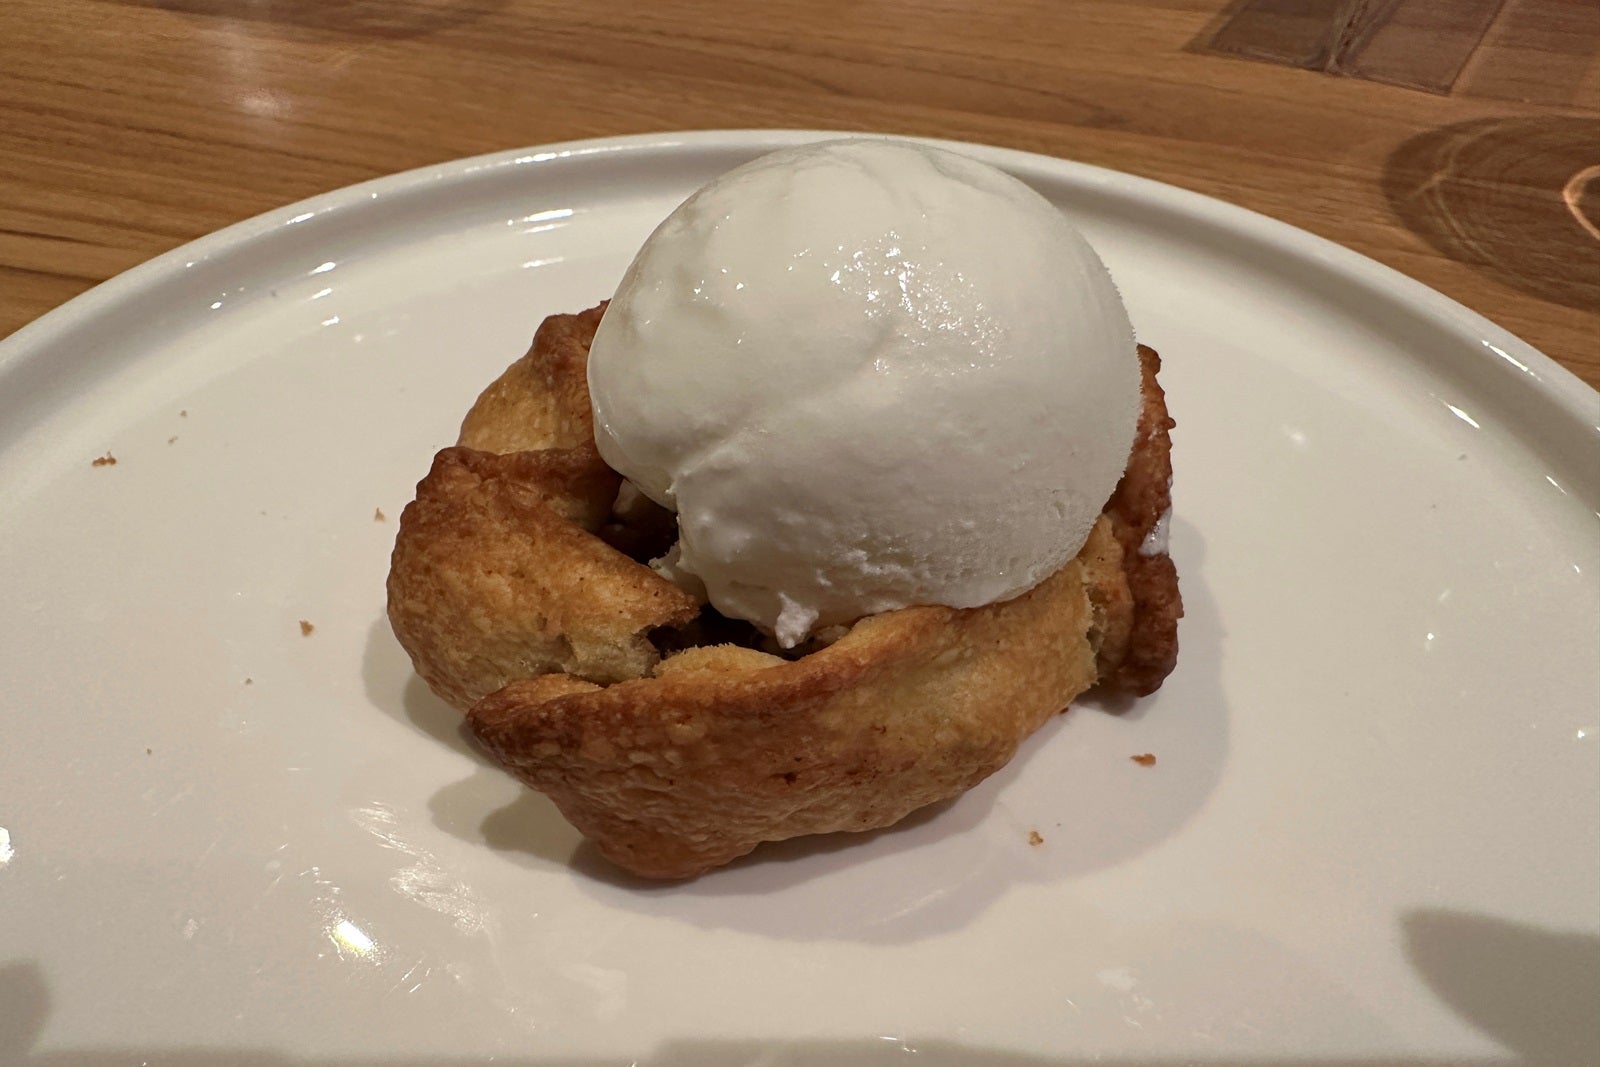 An apple pastry with a scoop of ice cream on top